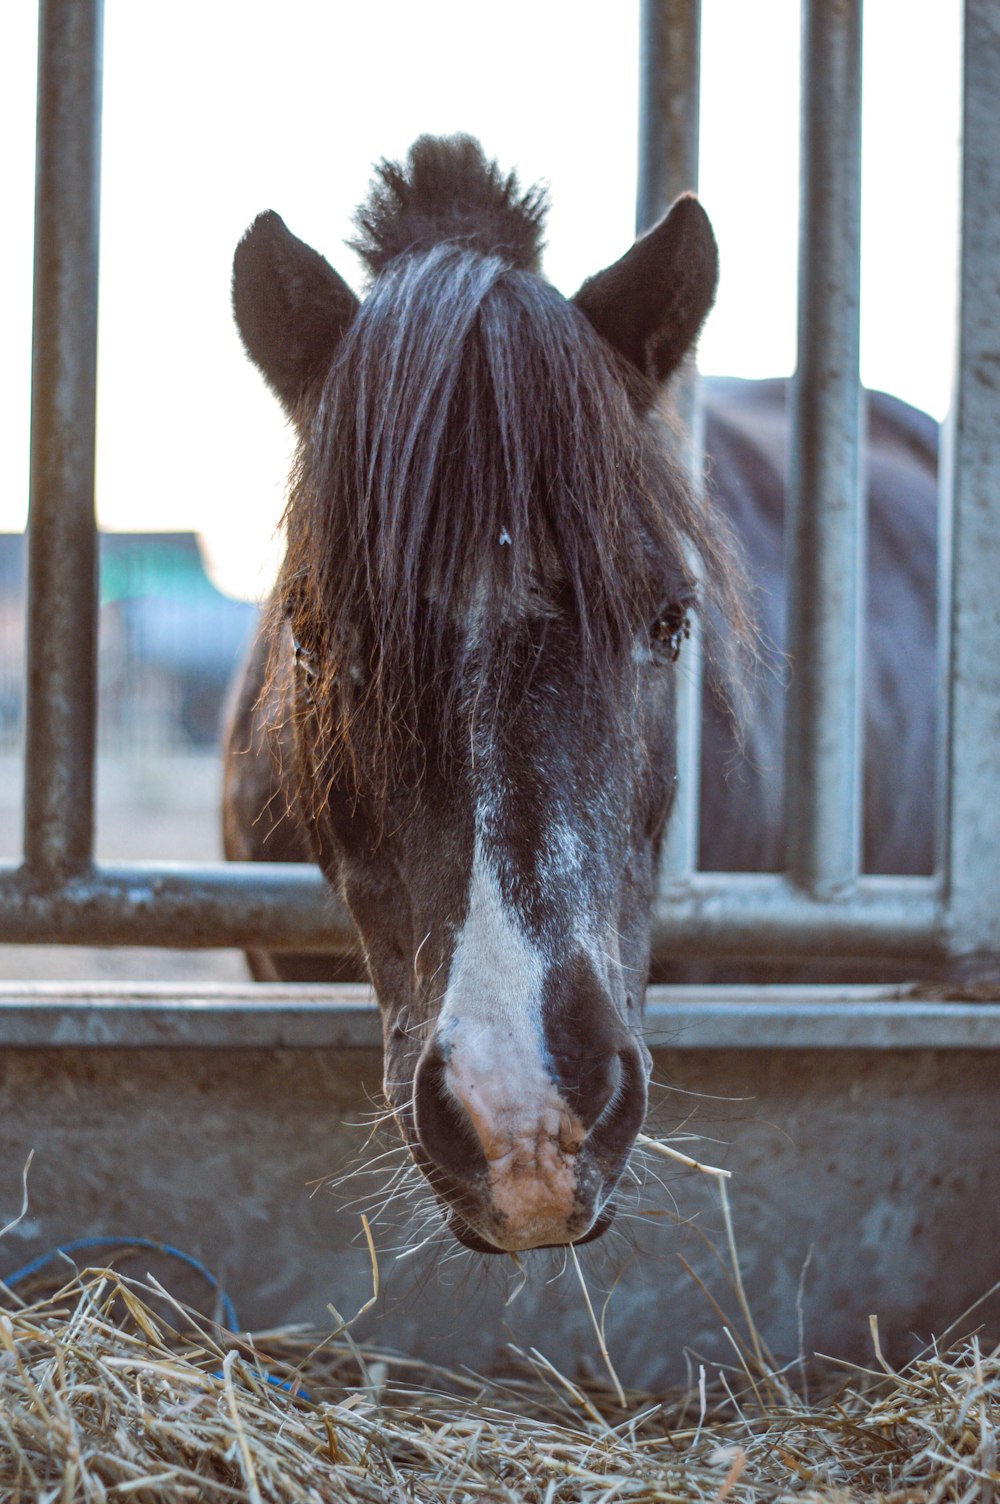 brown horse in cage during daytime